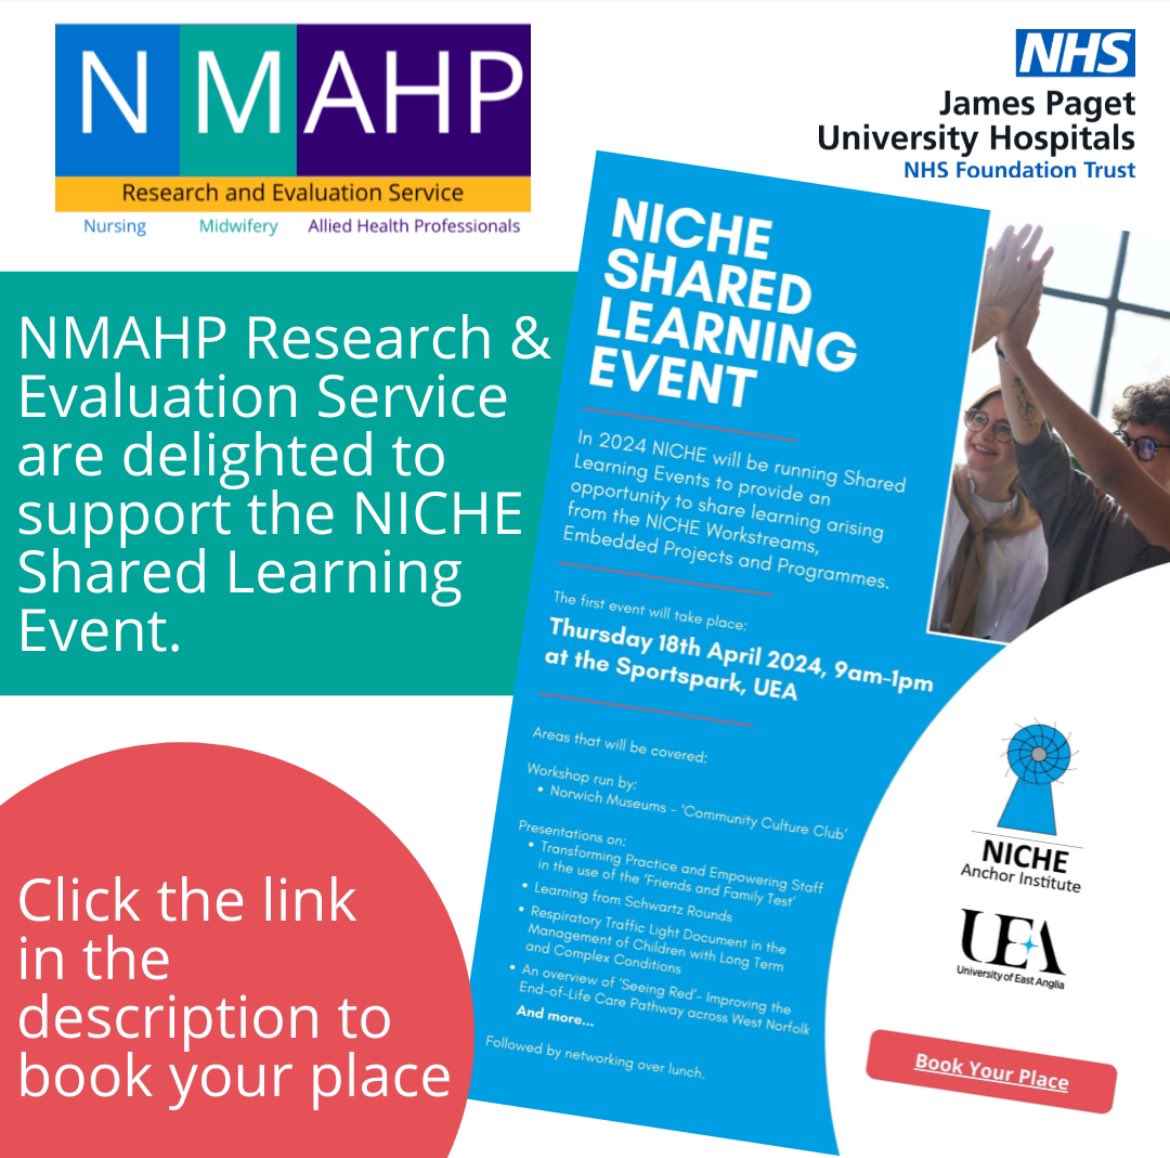 You are invited by Prof Jonathan Webster to attend the NICHE shared learning event to be held on 18th April 2024; booking is required and there is no cost NICHE Shared Learning Event | University of East Anglia Online Store (uea.ac.uk) @UEA_NICHE